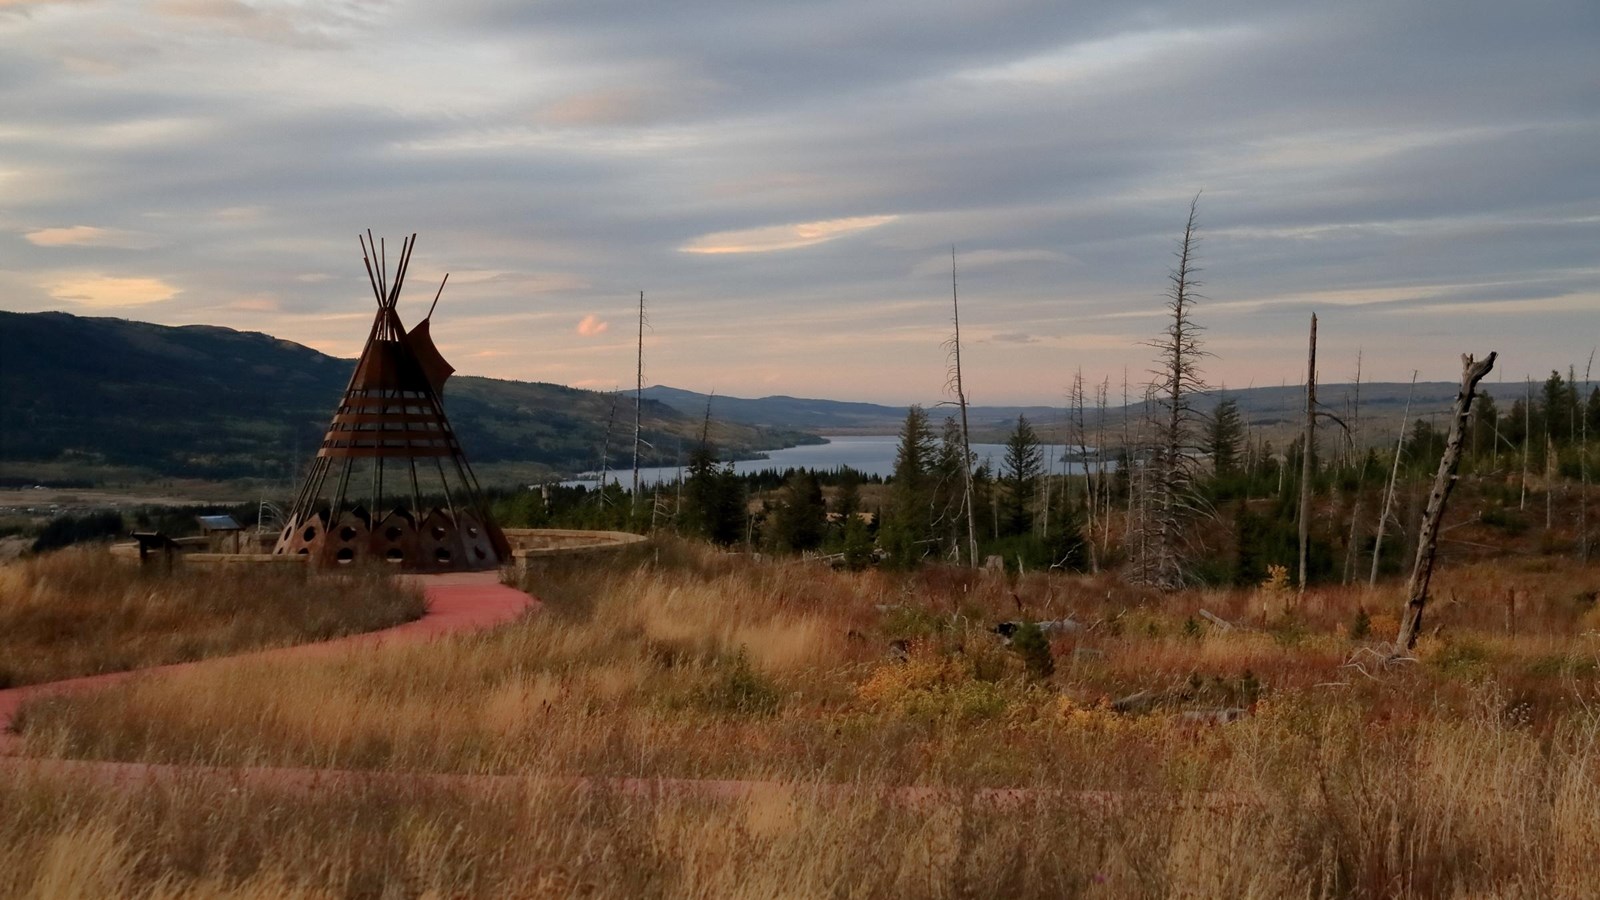 Photo of a grassy area at sunset with mountains and river available in the distance with metal tipi